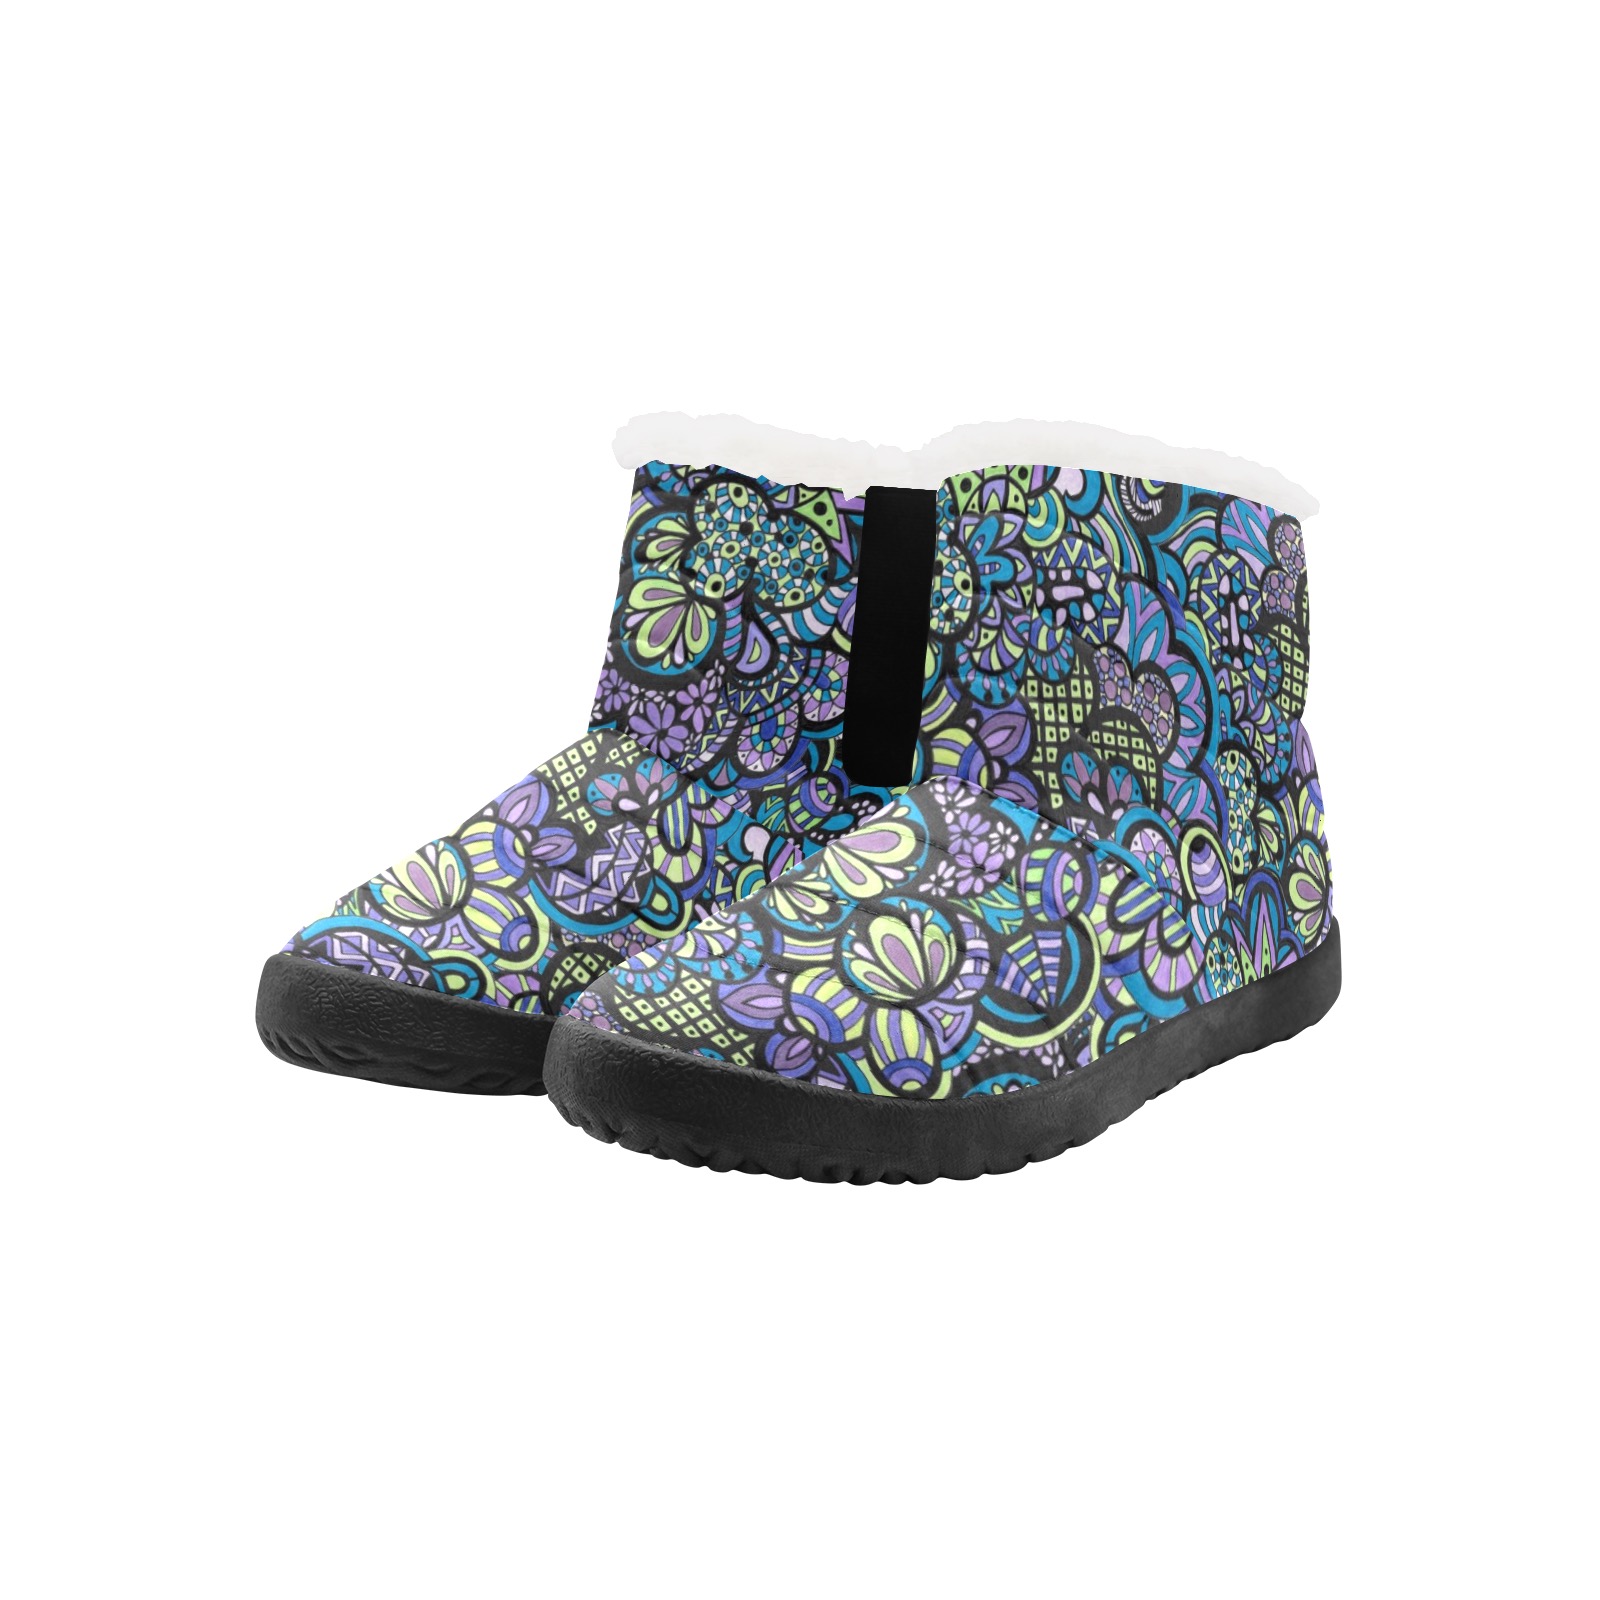 Scrambled Peacock Eggs Women's Cotton-Padded Shoes (Model 19291)